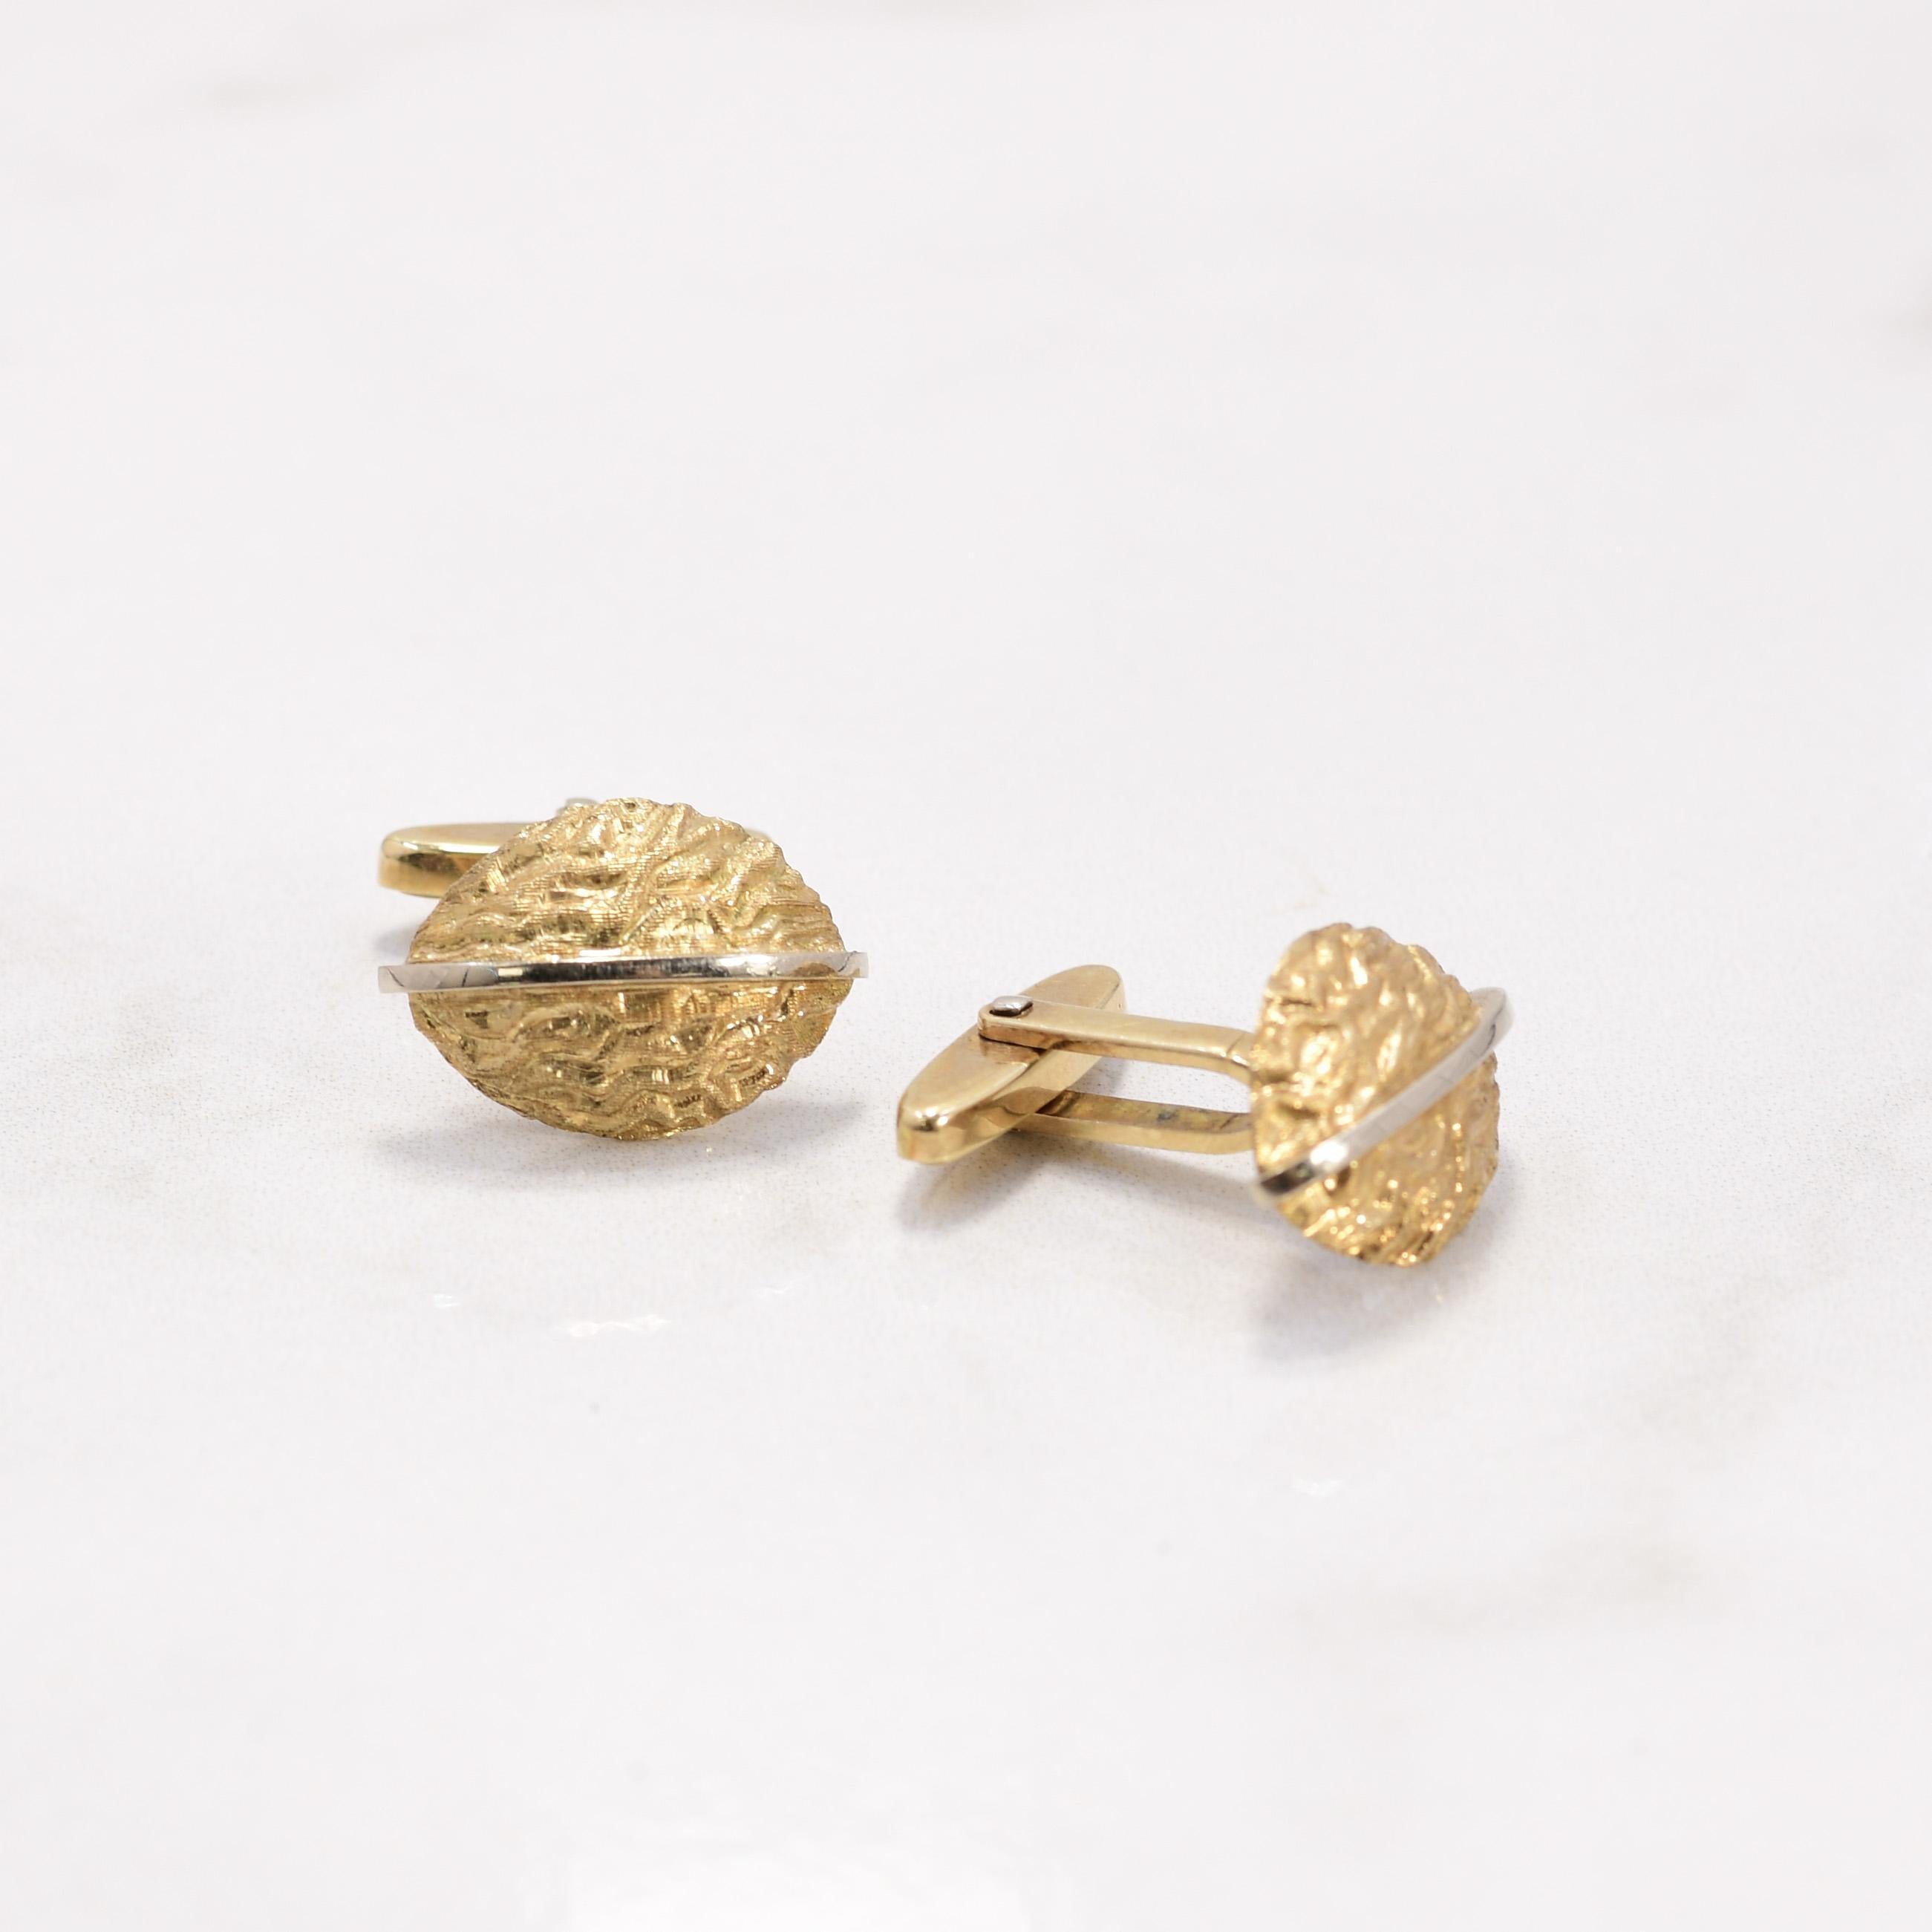 The 14K Yellow Gold Nutmeg Form Cufflinks are a unique and stylish accessory for the discerning gentleman. Crafted with exquisite attention to detail, these cufflinks feature a distinctive nutmeg shape in radiant yellow gold. Their elegant and